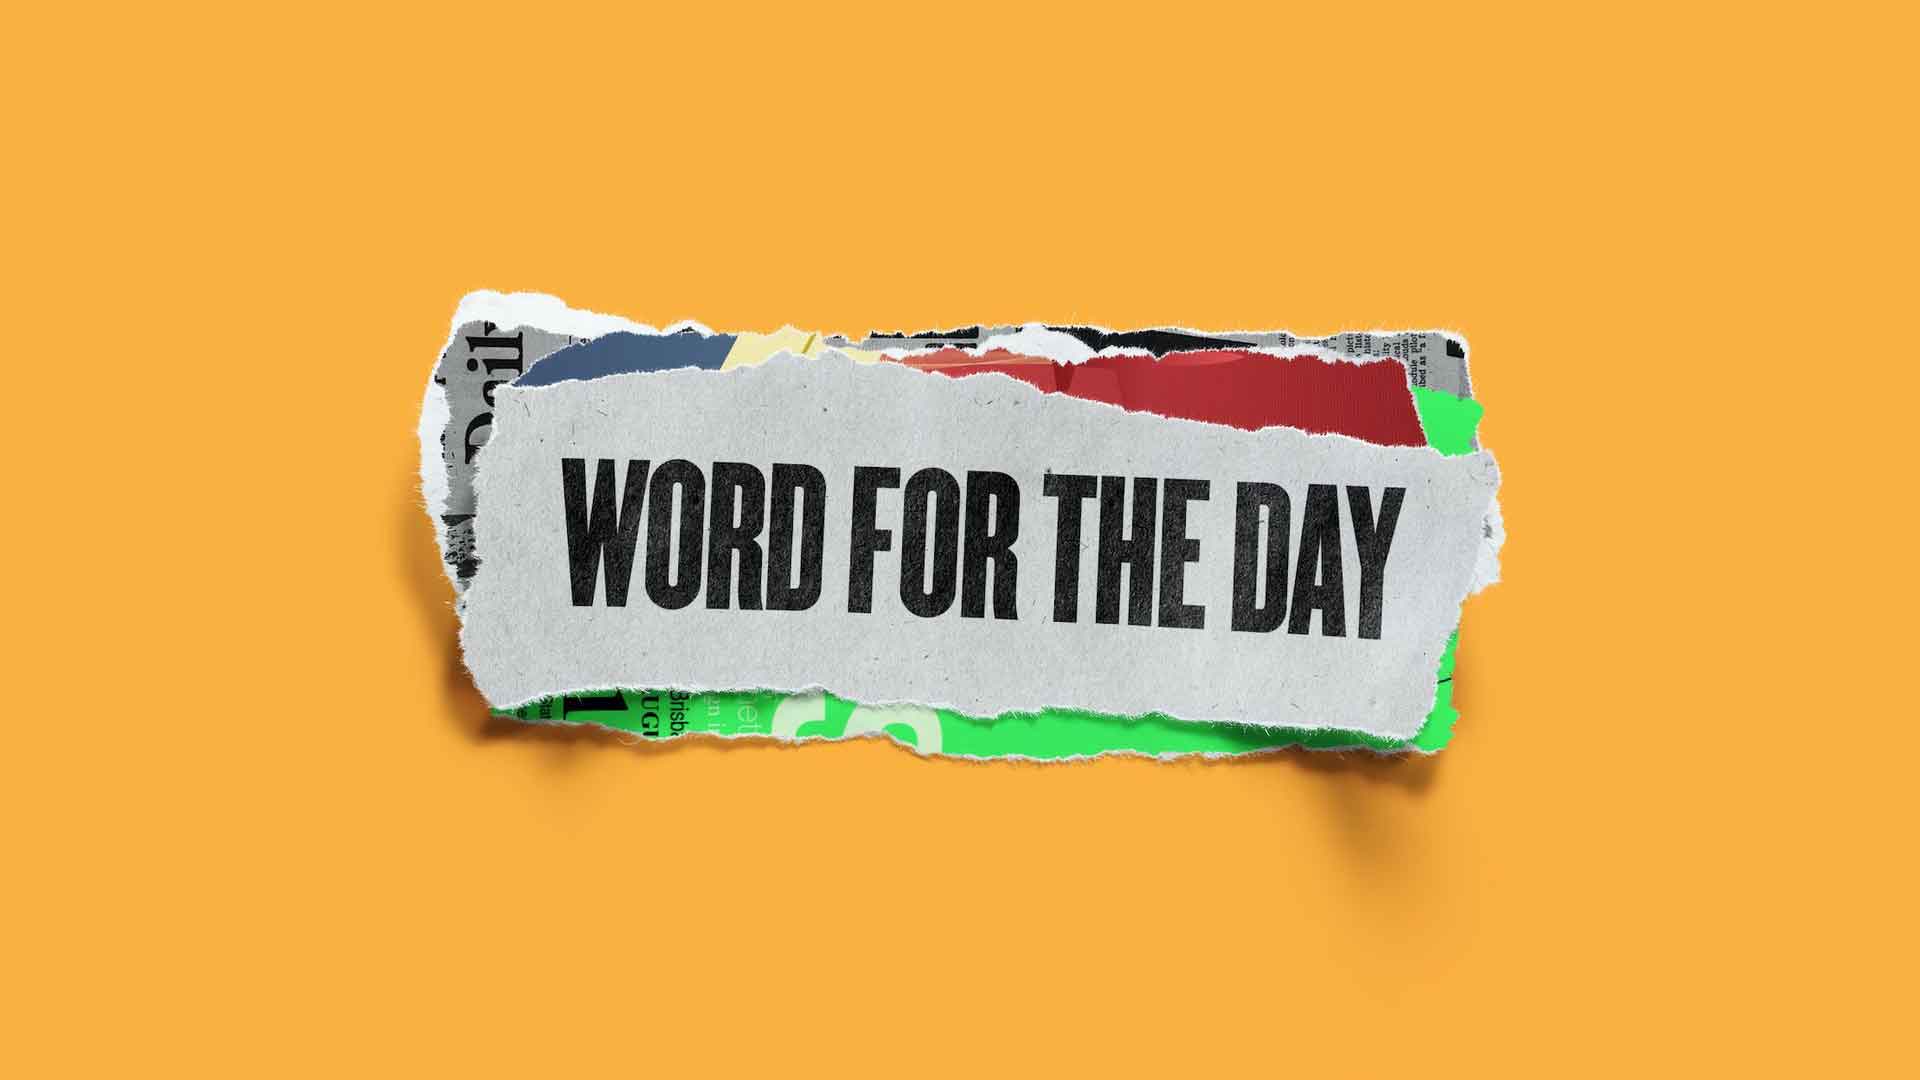 Featured Image for “Word For The Day"